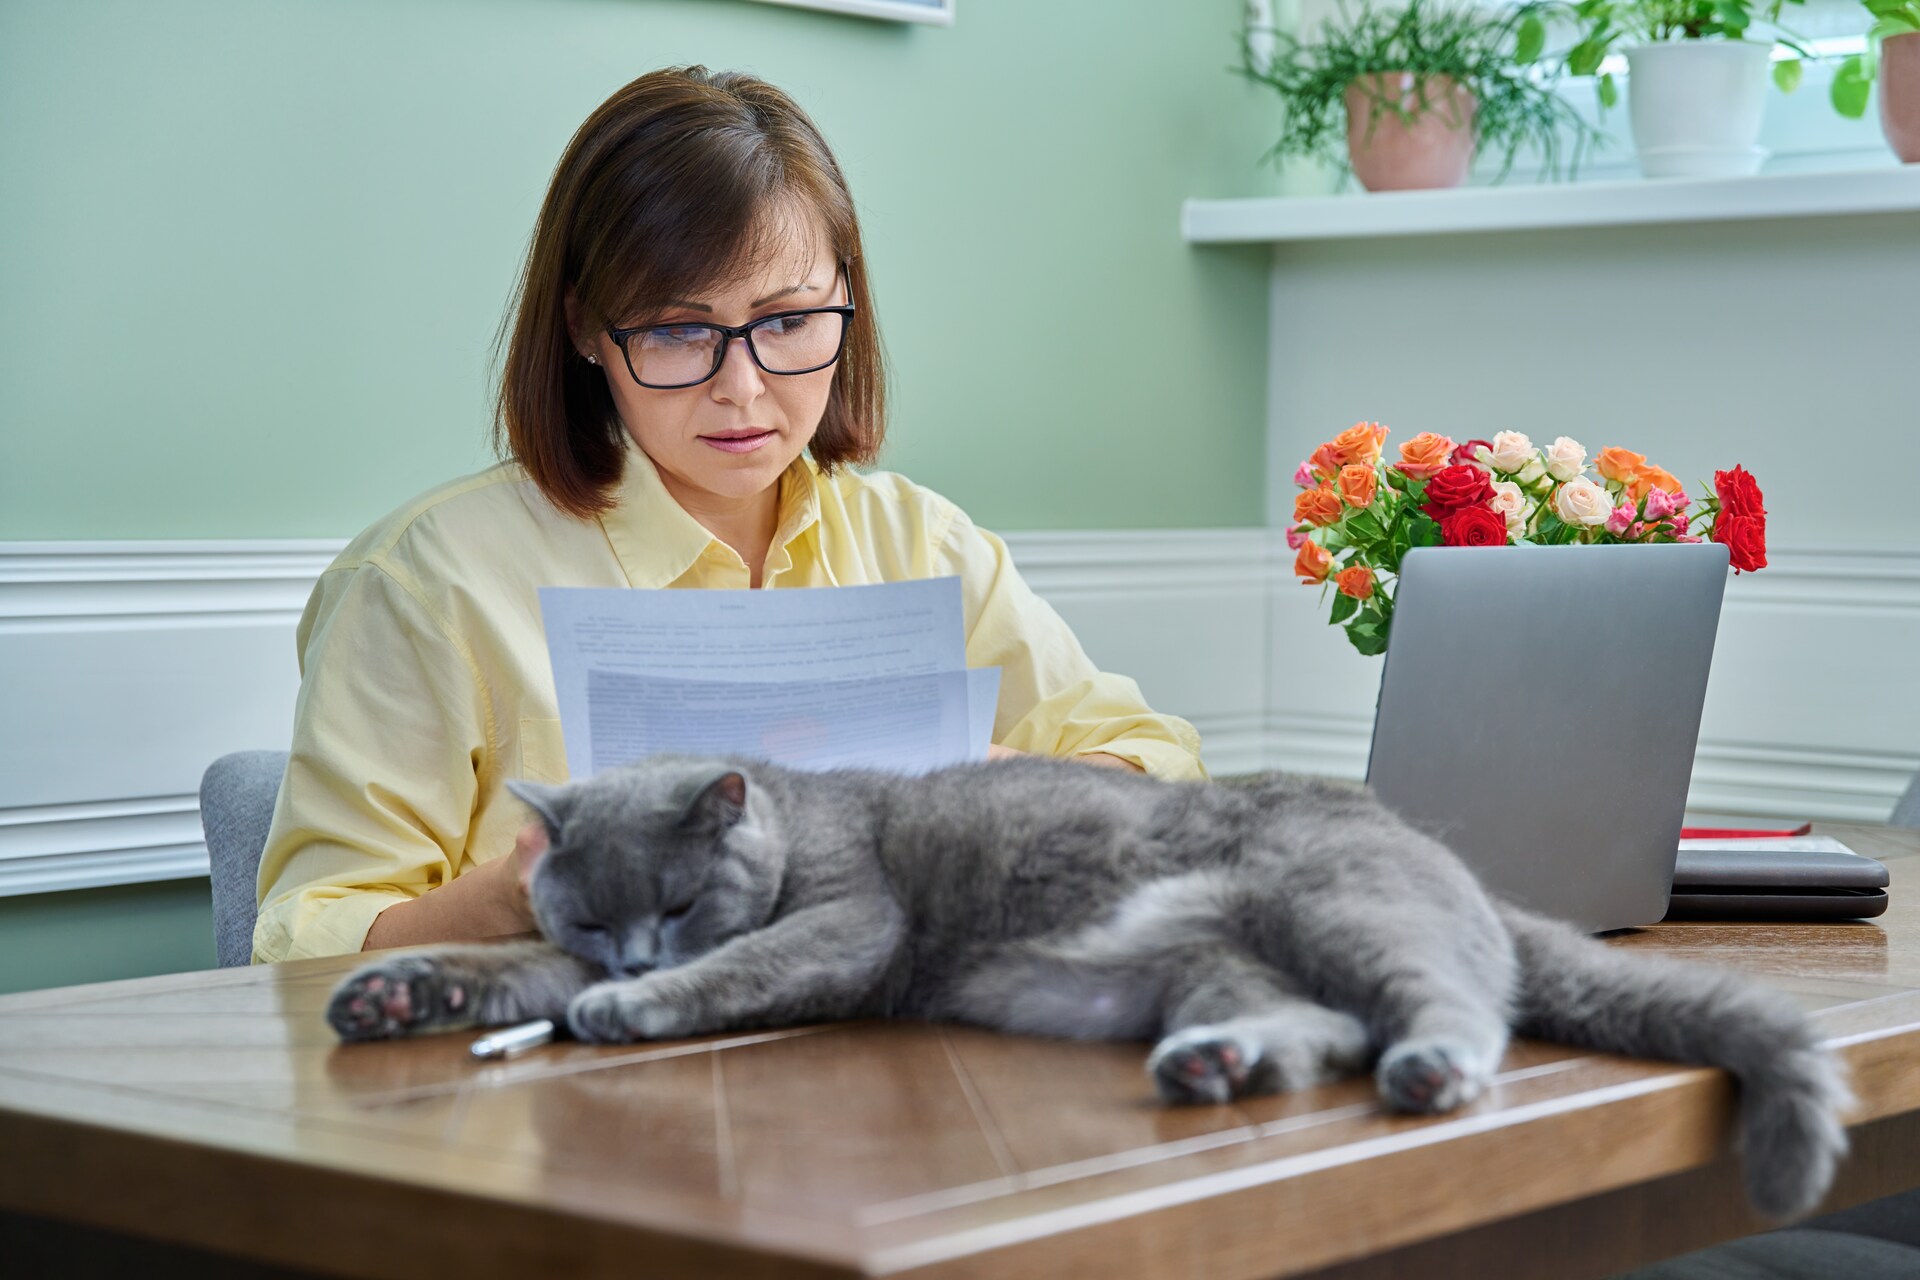 A woman checking her older cat's vet bills at a table